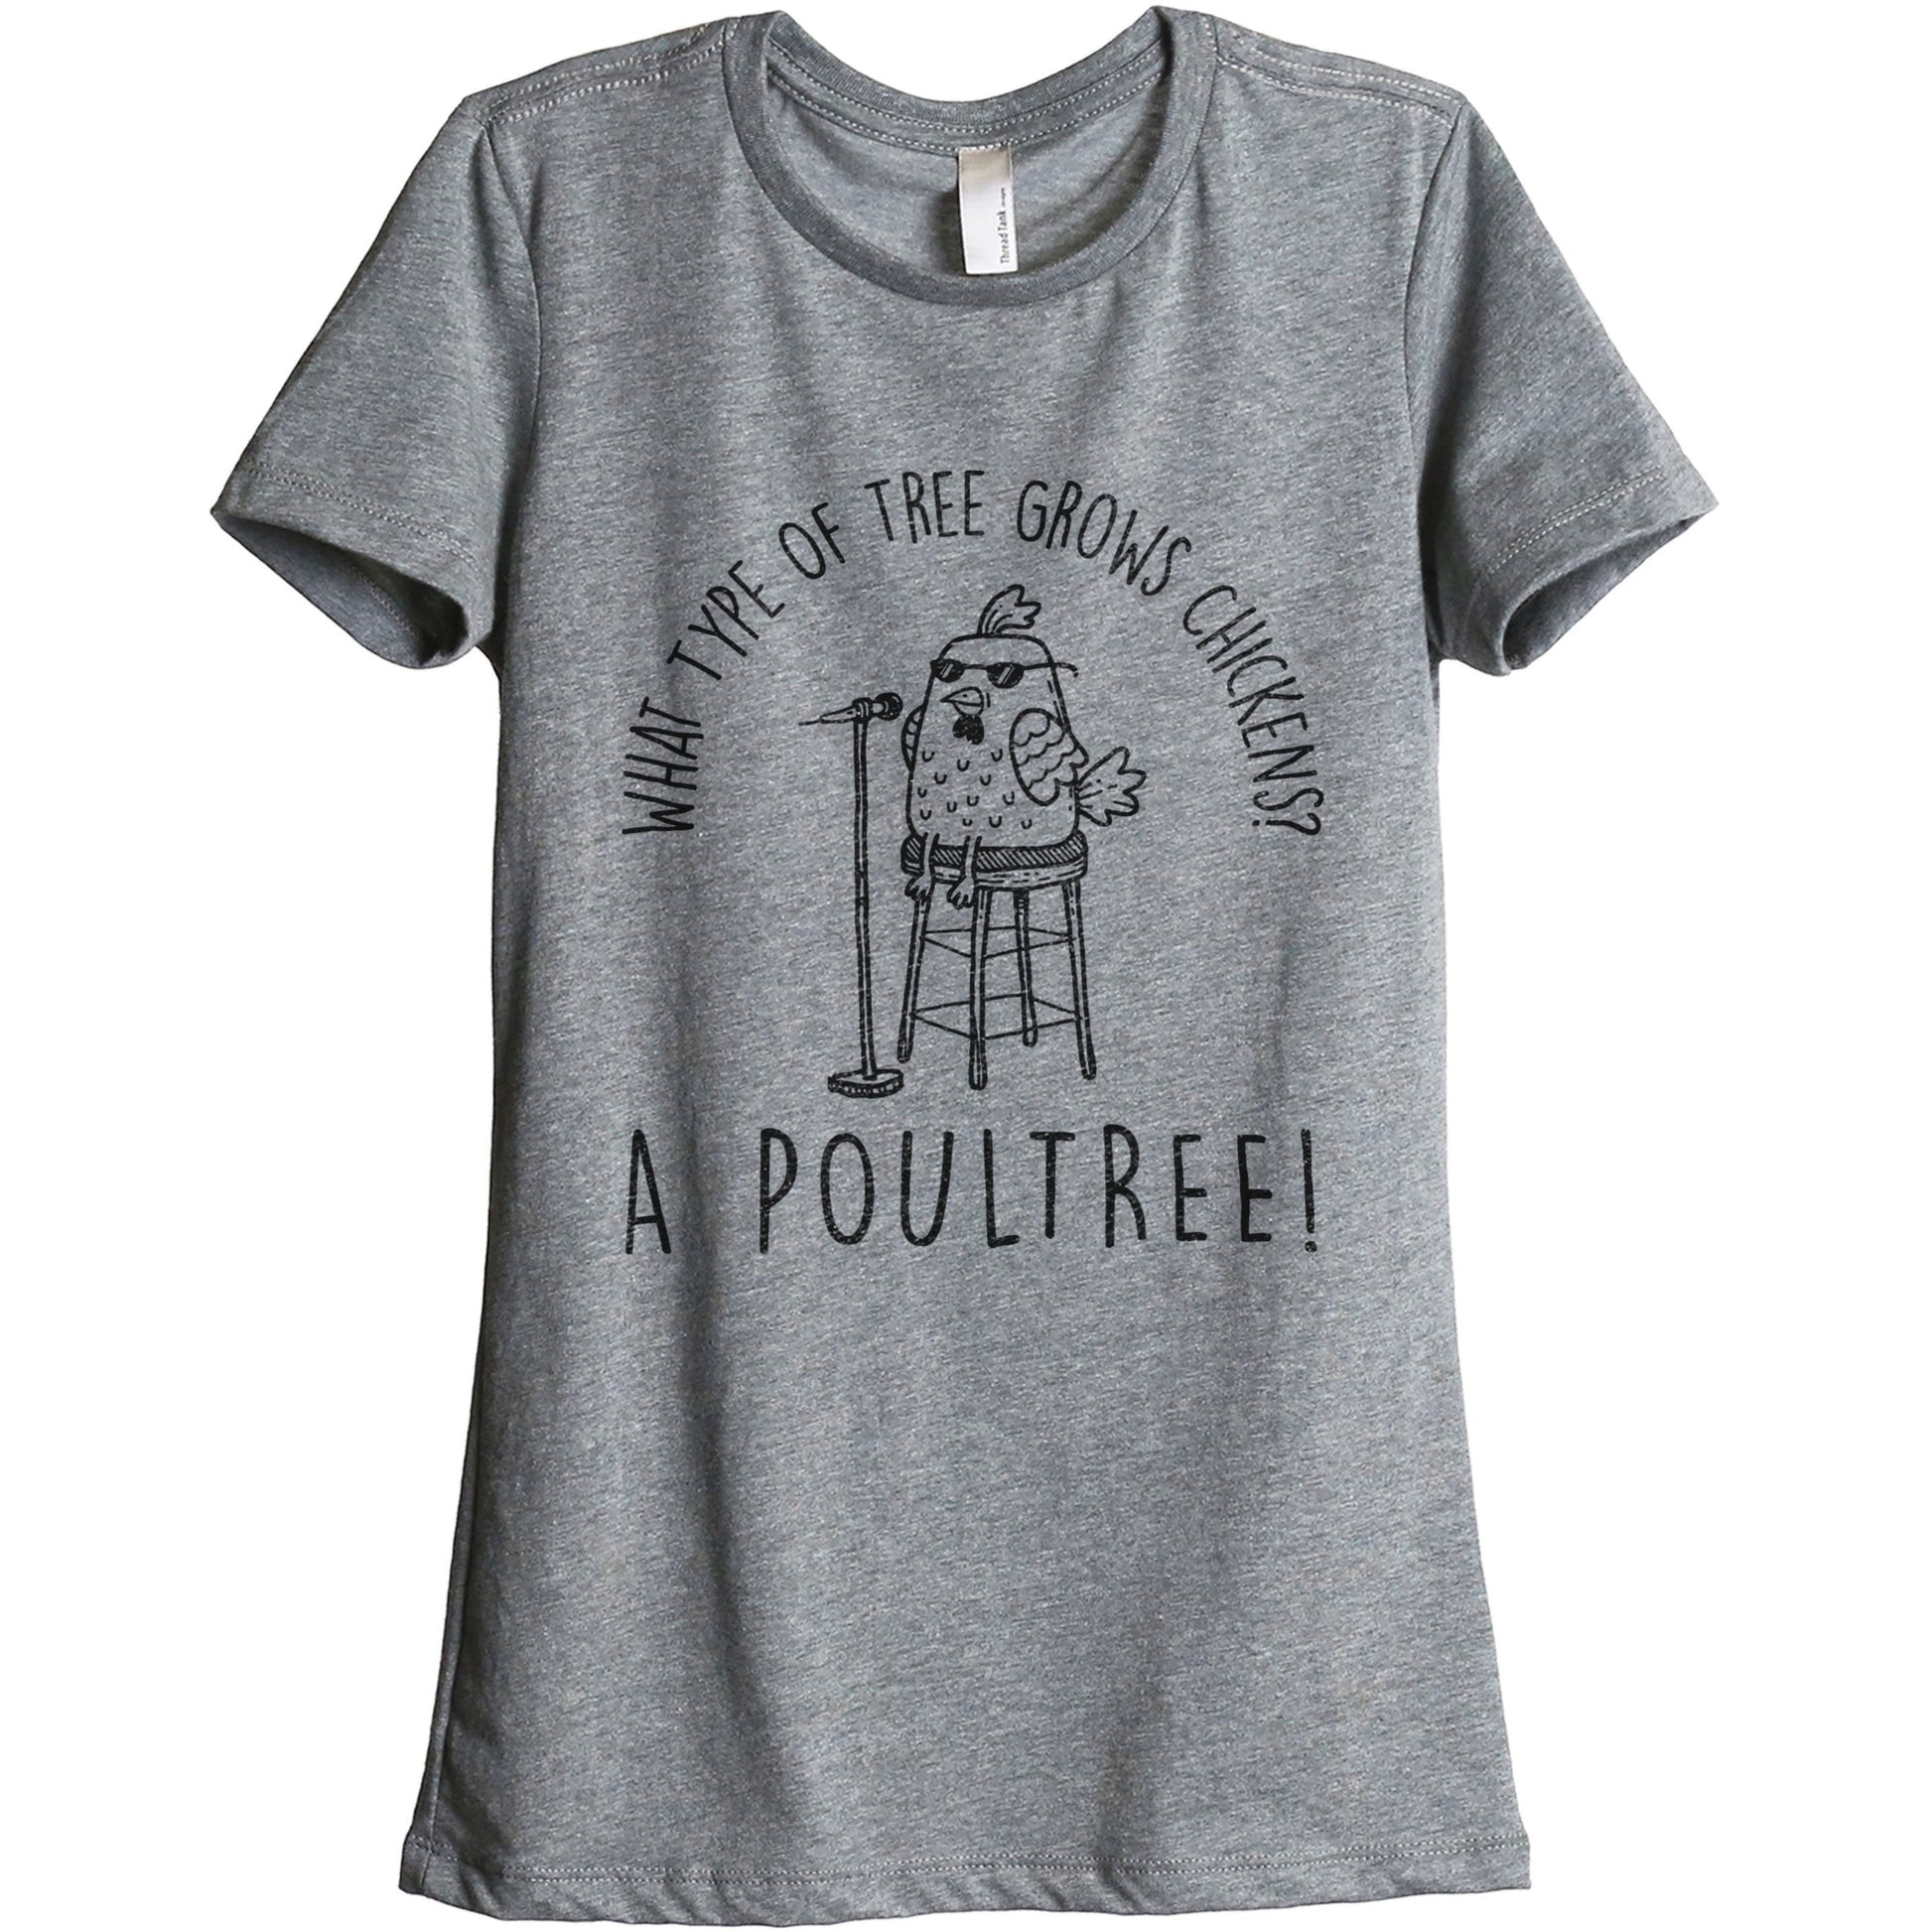 What Type Of Tree Grows Chickens? A Poultree! - threadtank | stories you can wear